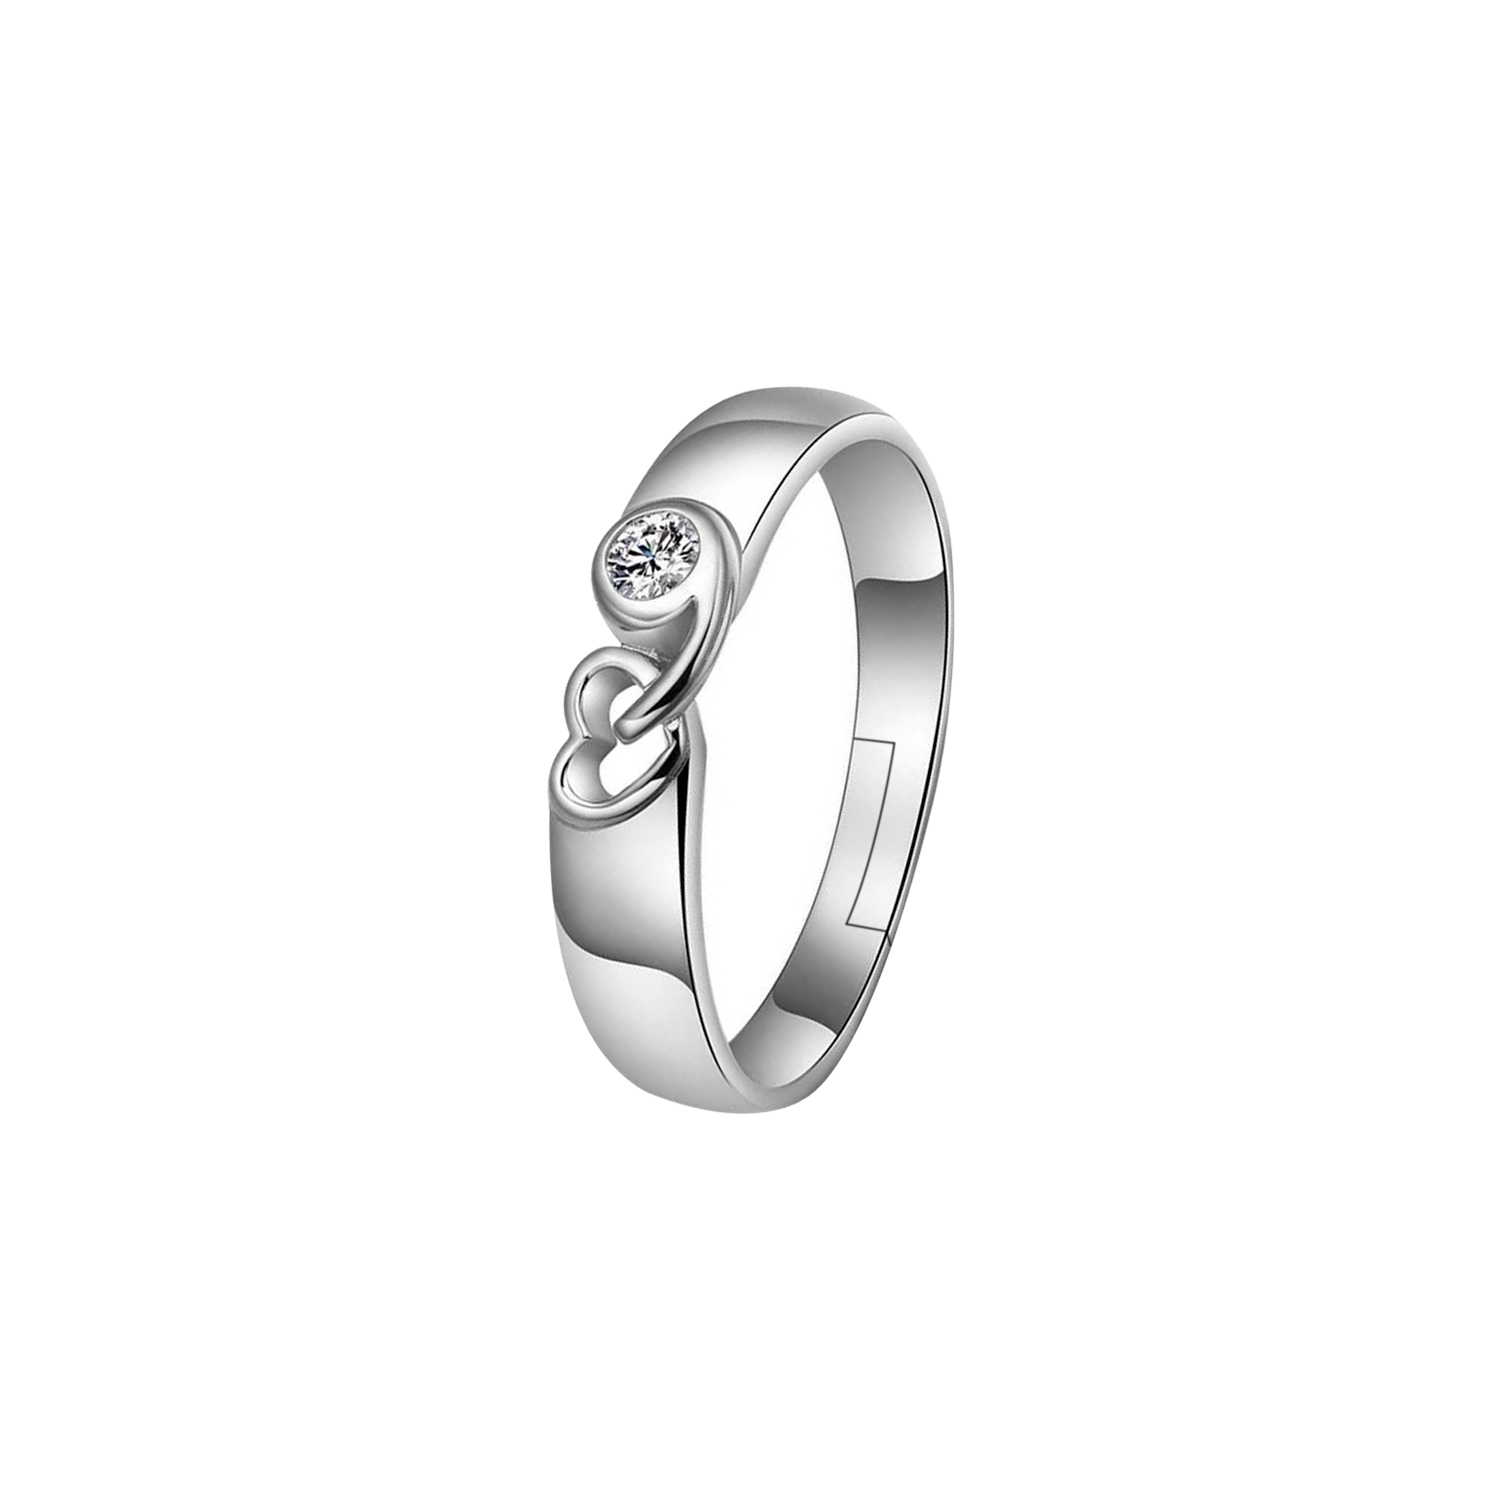 Aienid Custom Ring Name,Sterling Silver Ring for Women Couple Ring  Set|Amazon.com